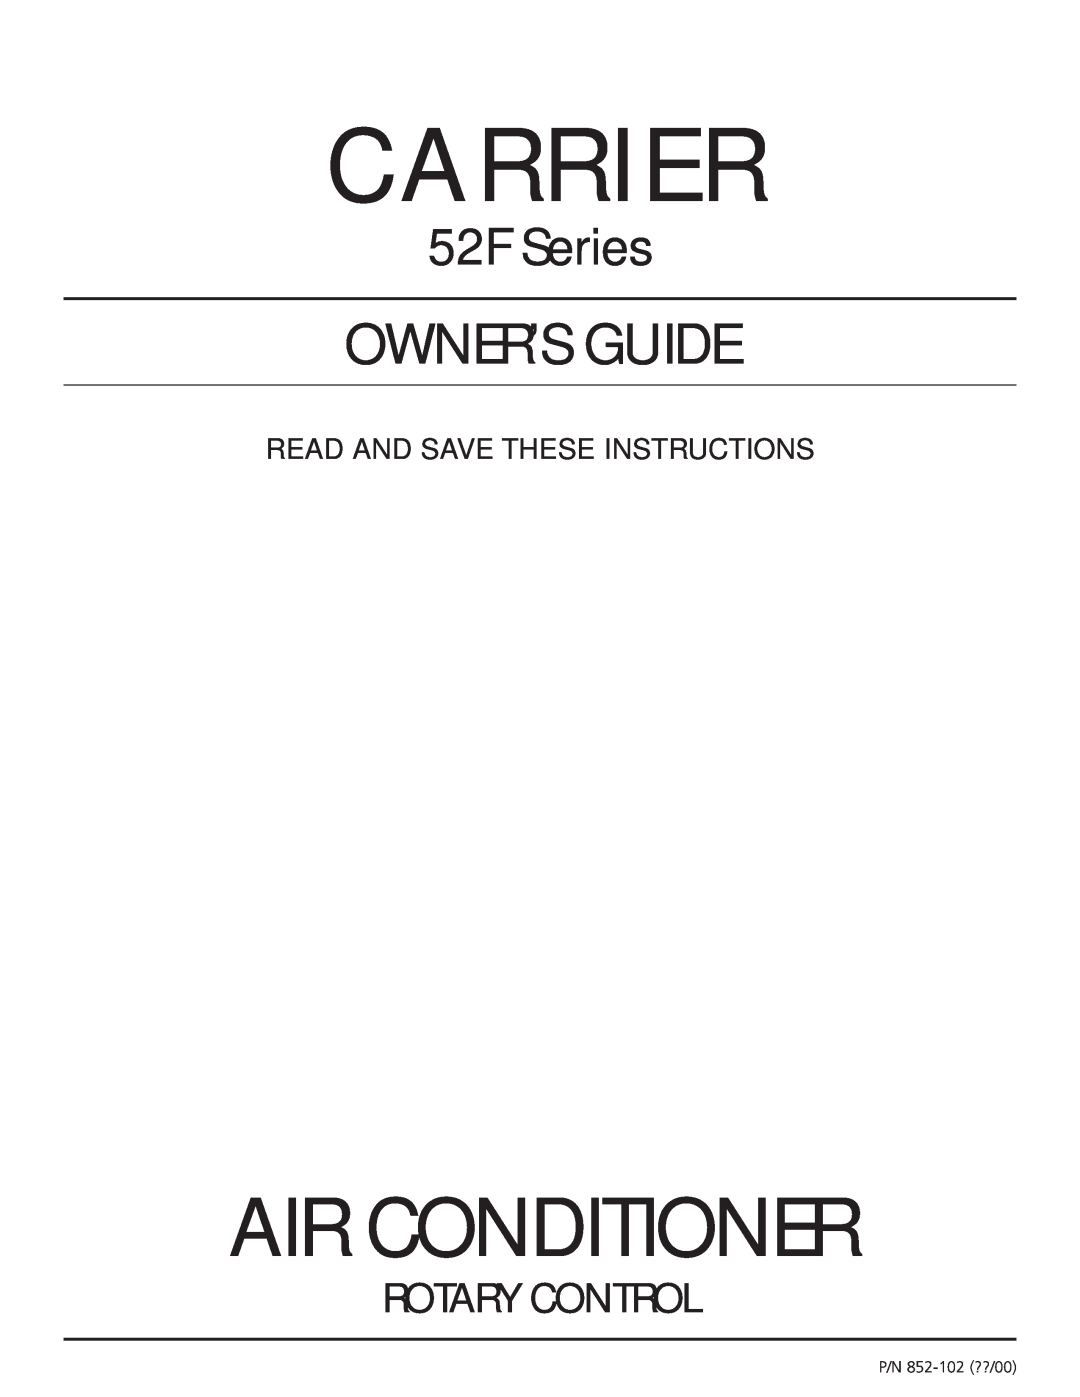 Carrier Access 52F Series manual C A R R I E R, Air Conditioner, Owner’S Guide, Rotary Control 